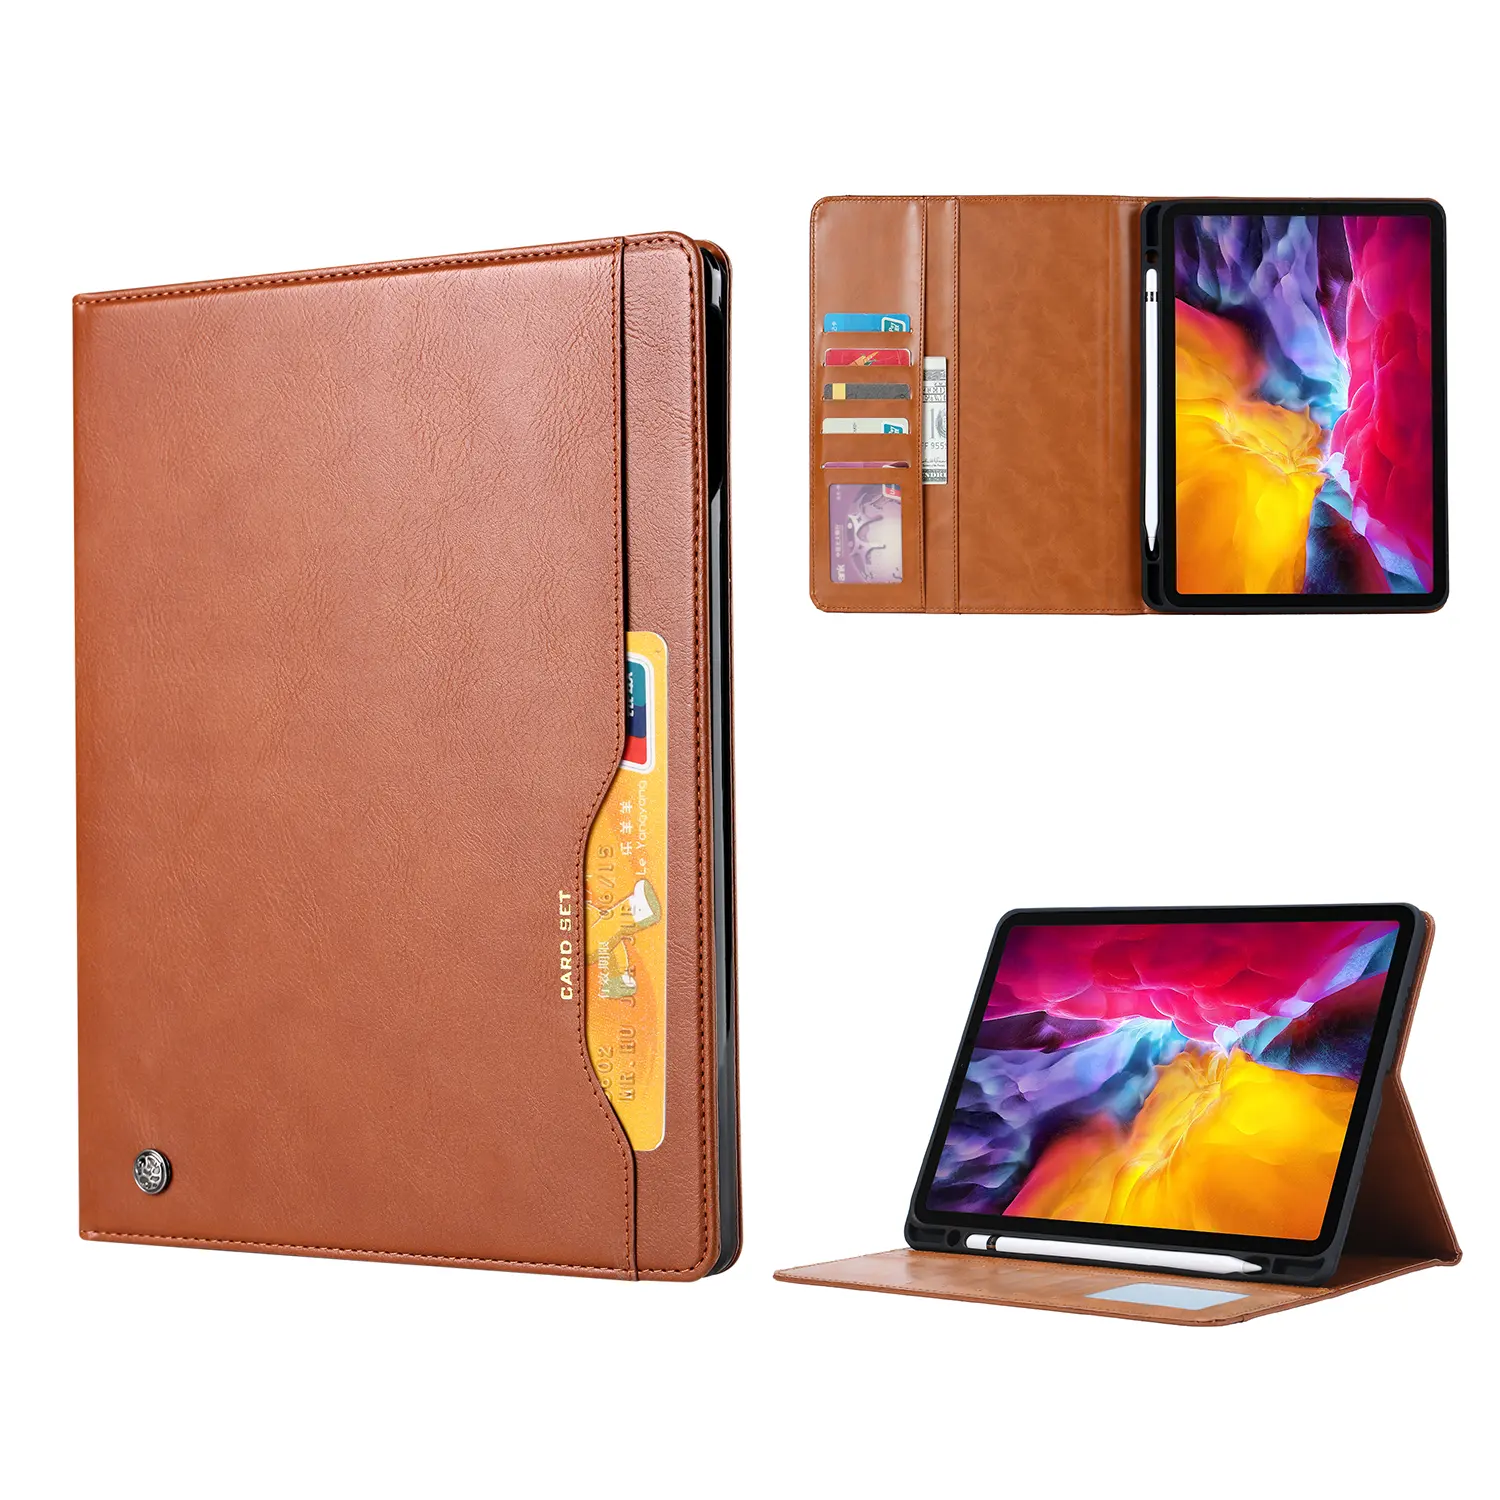 Leather Folio Case Cover for iPad Pro 11 inch 4th Generation 2022 Full Protection Wallet Stand Function